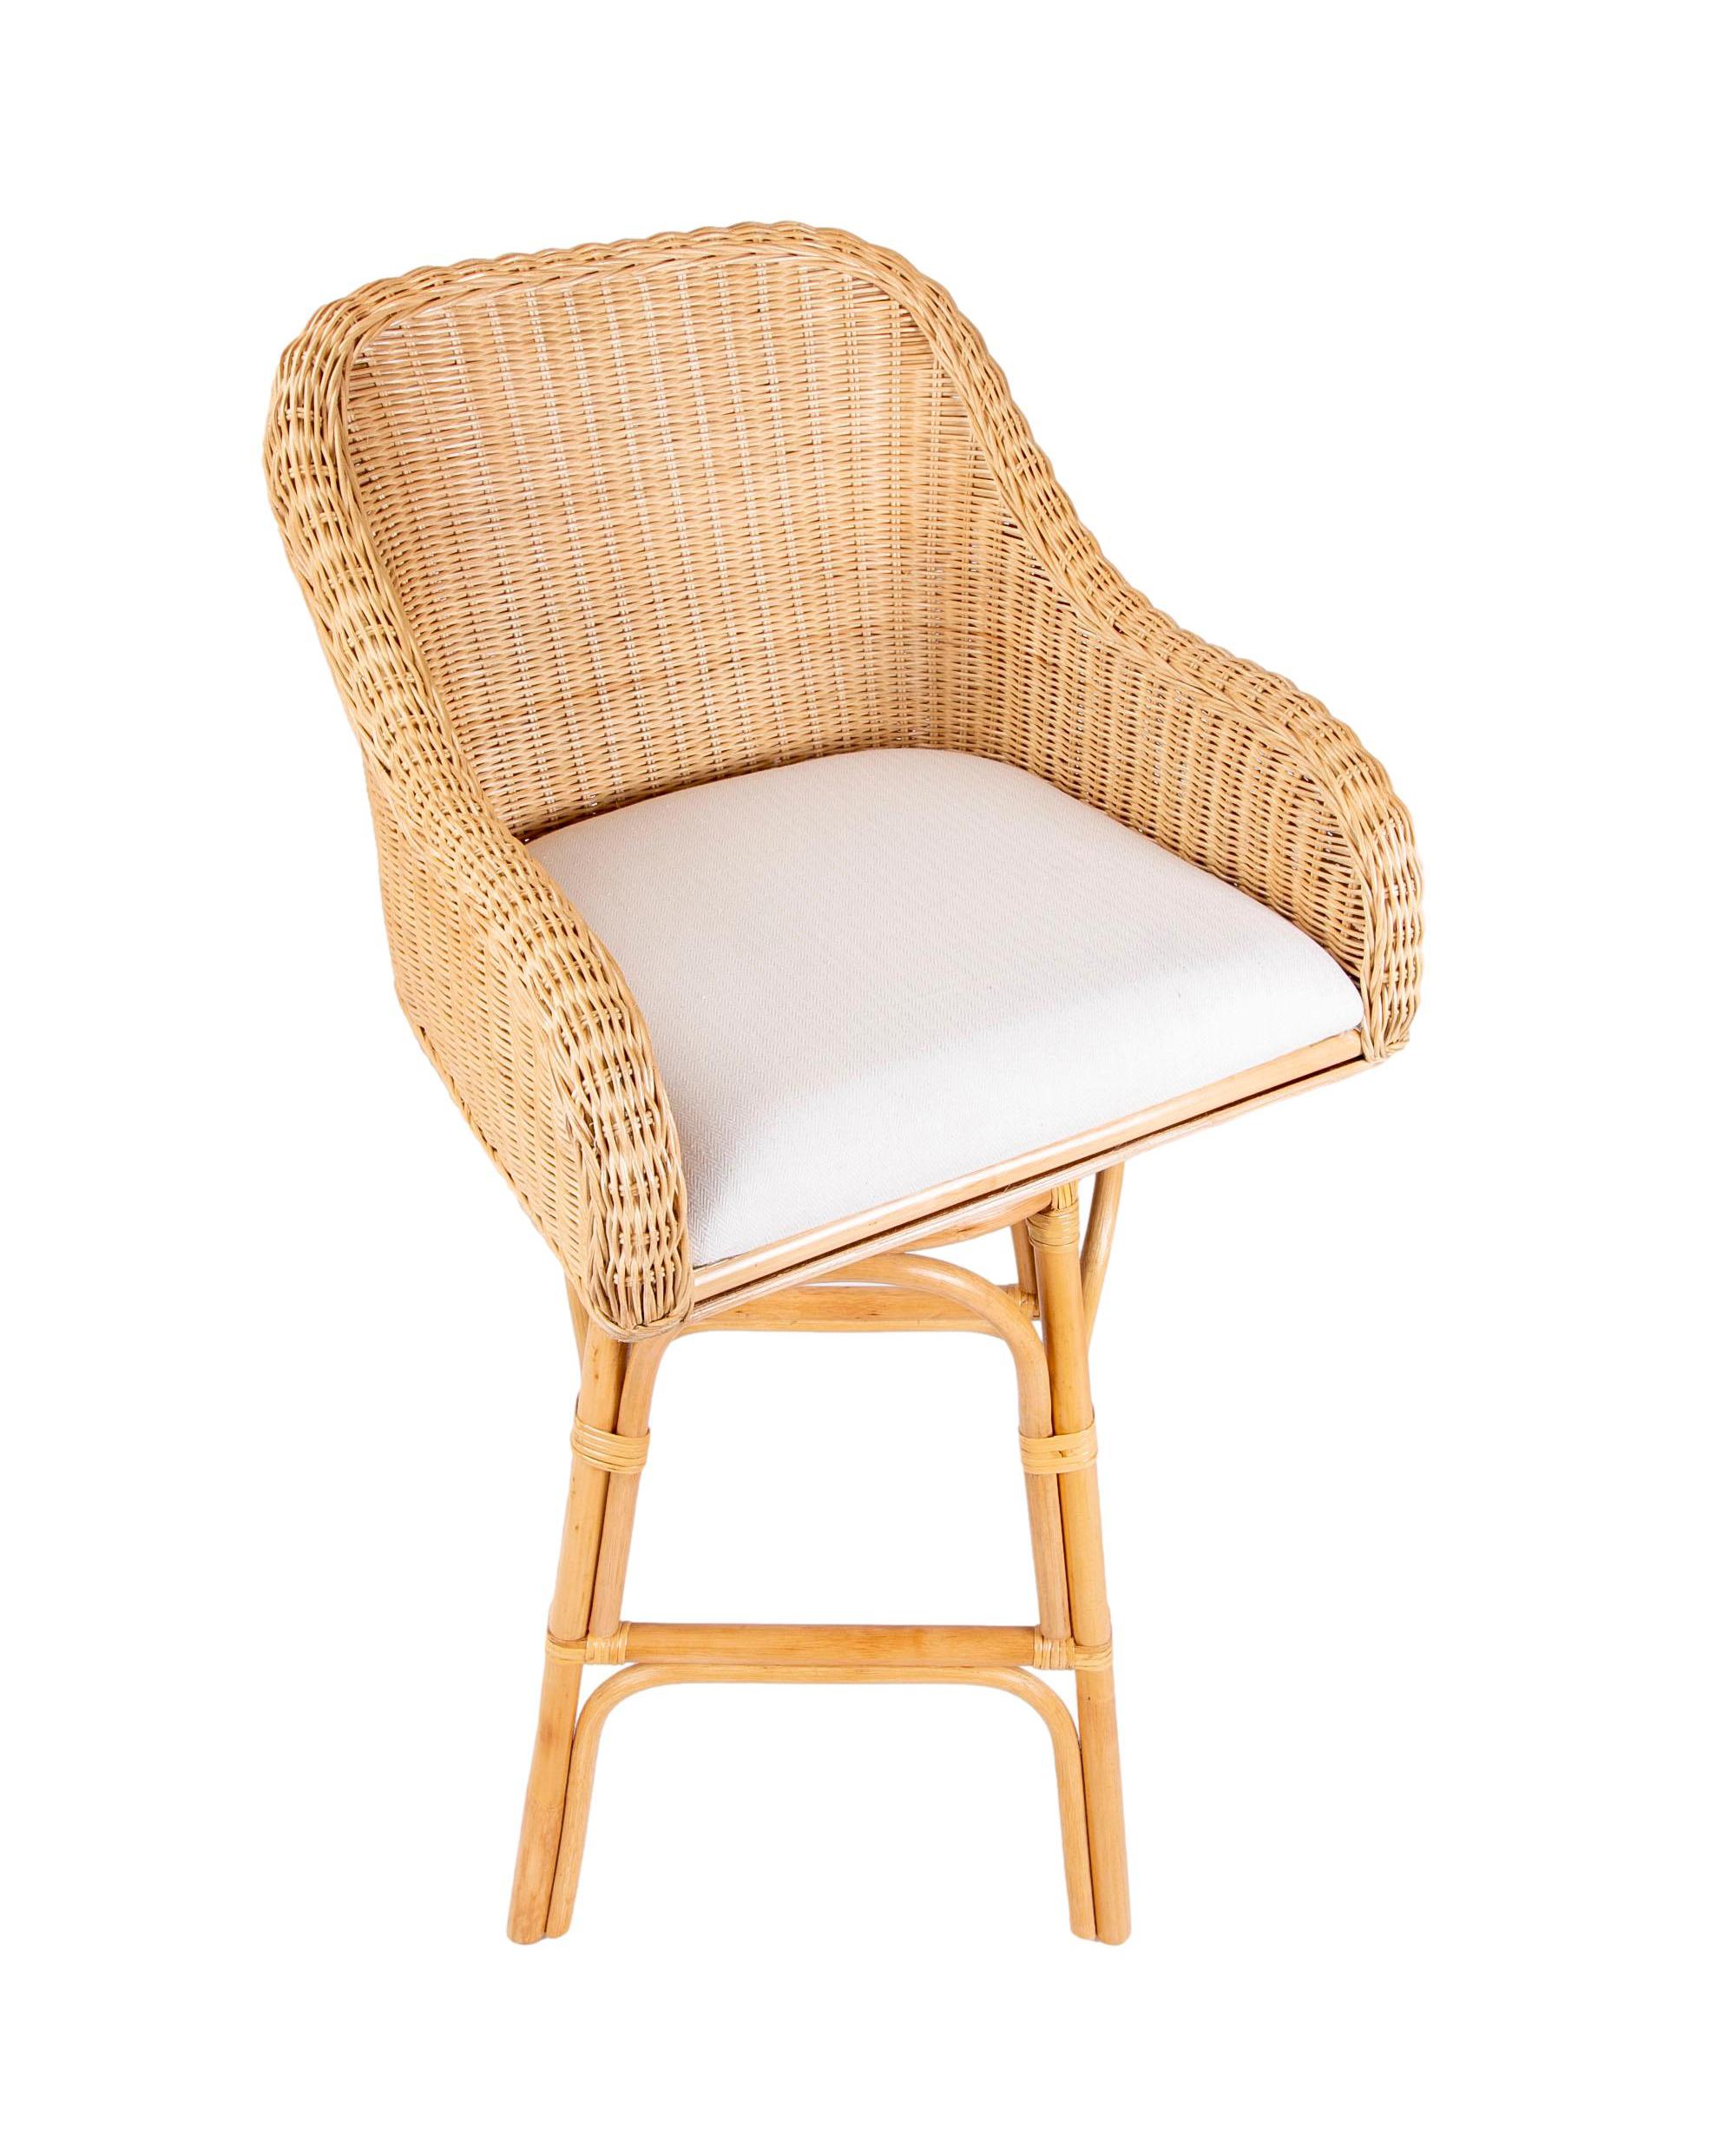 Pair of Two Upholstered Rattan and Wicker Bar stools with Sideways Movement For Sale 4